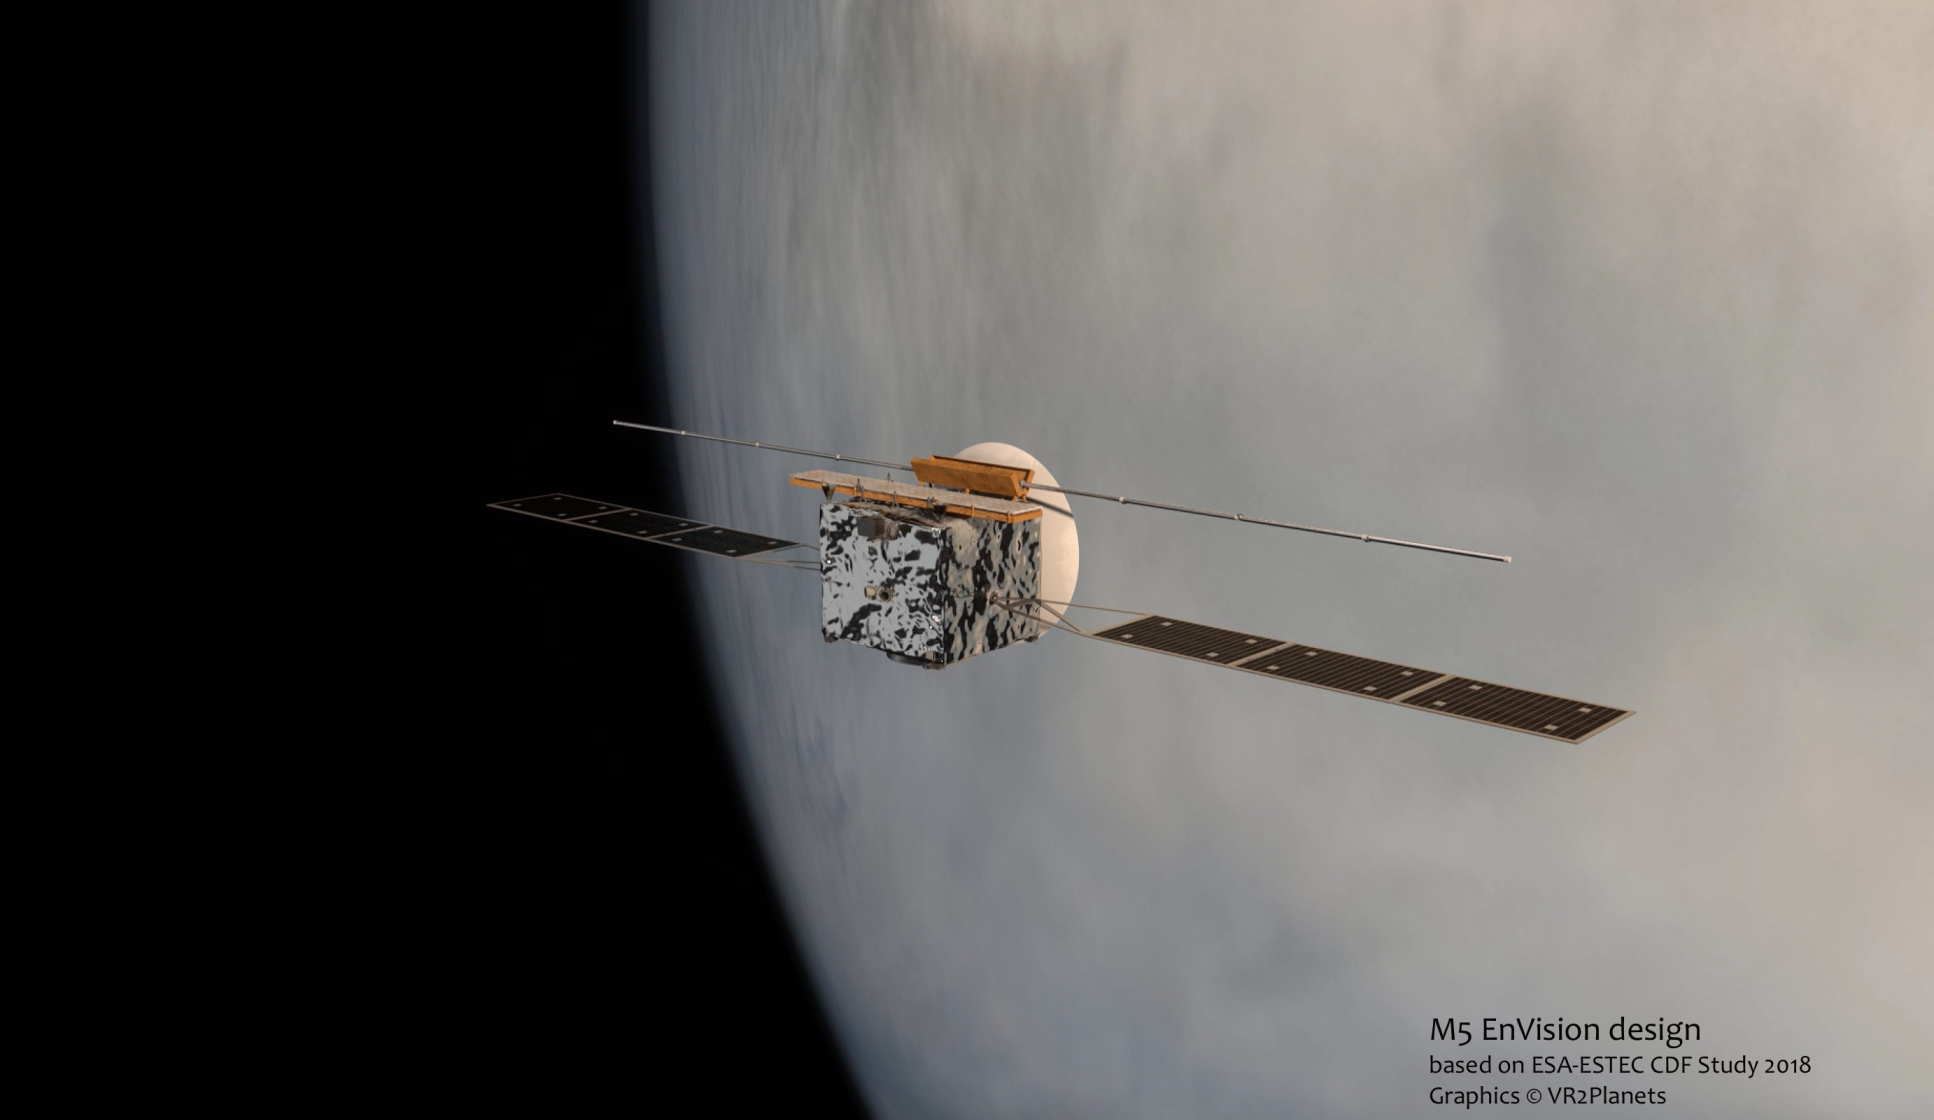 An illustration of the EnVision spacecraft